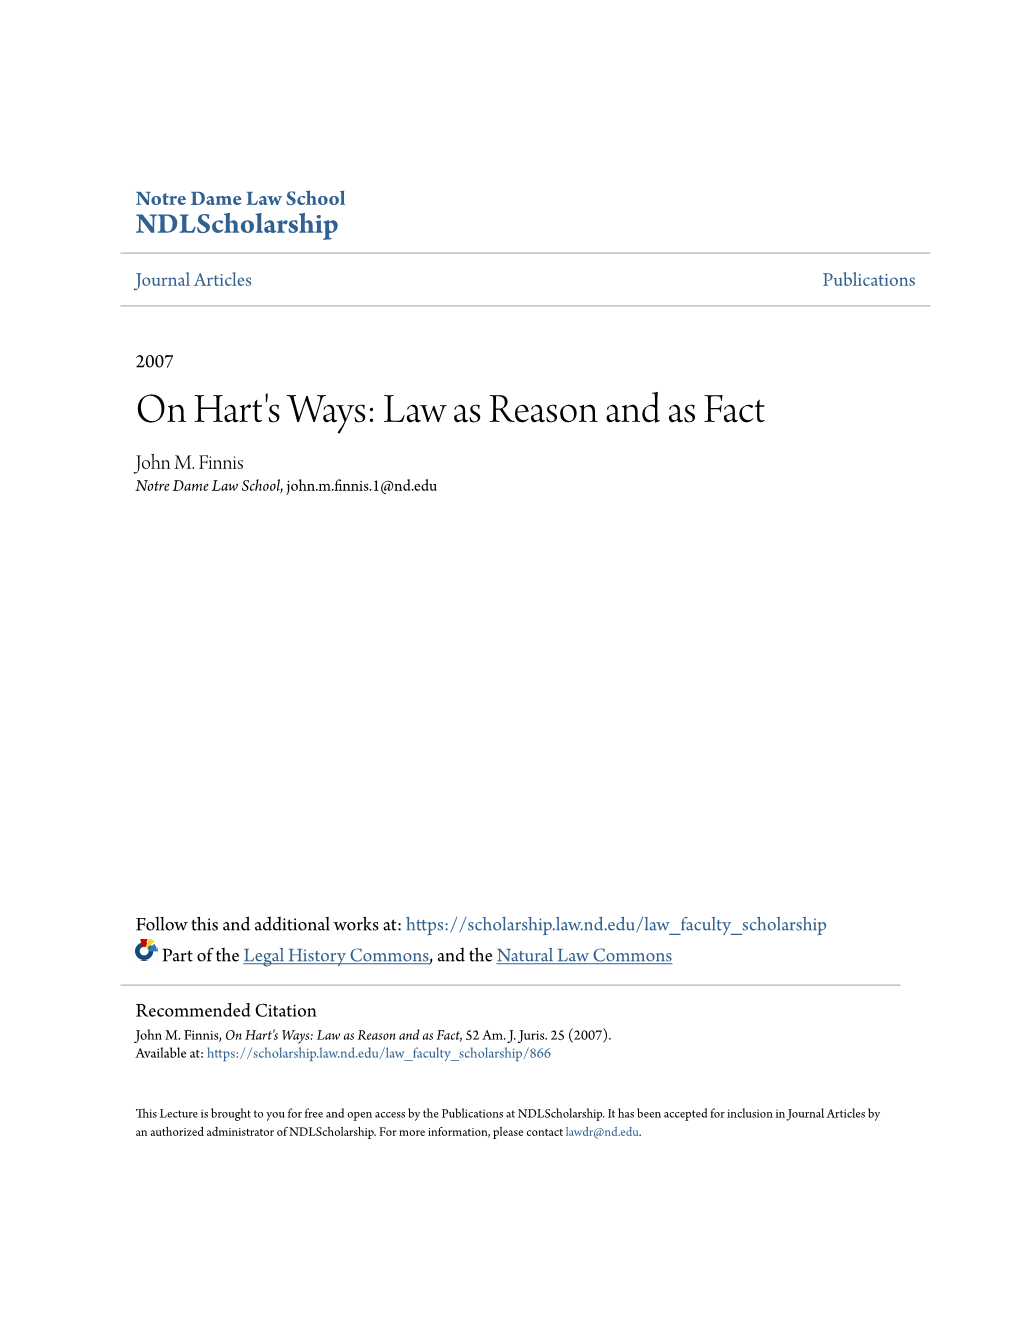 On Hart's Ways: Law As Reason and As Fact John M